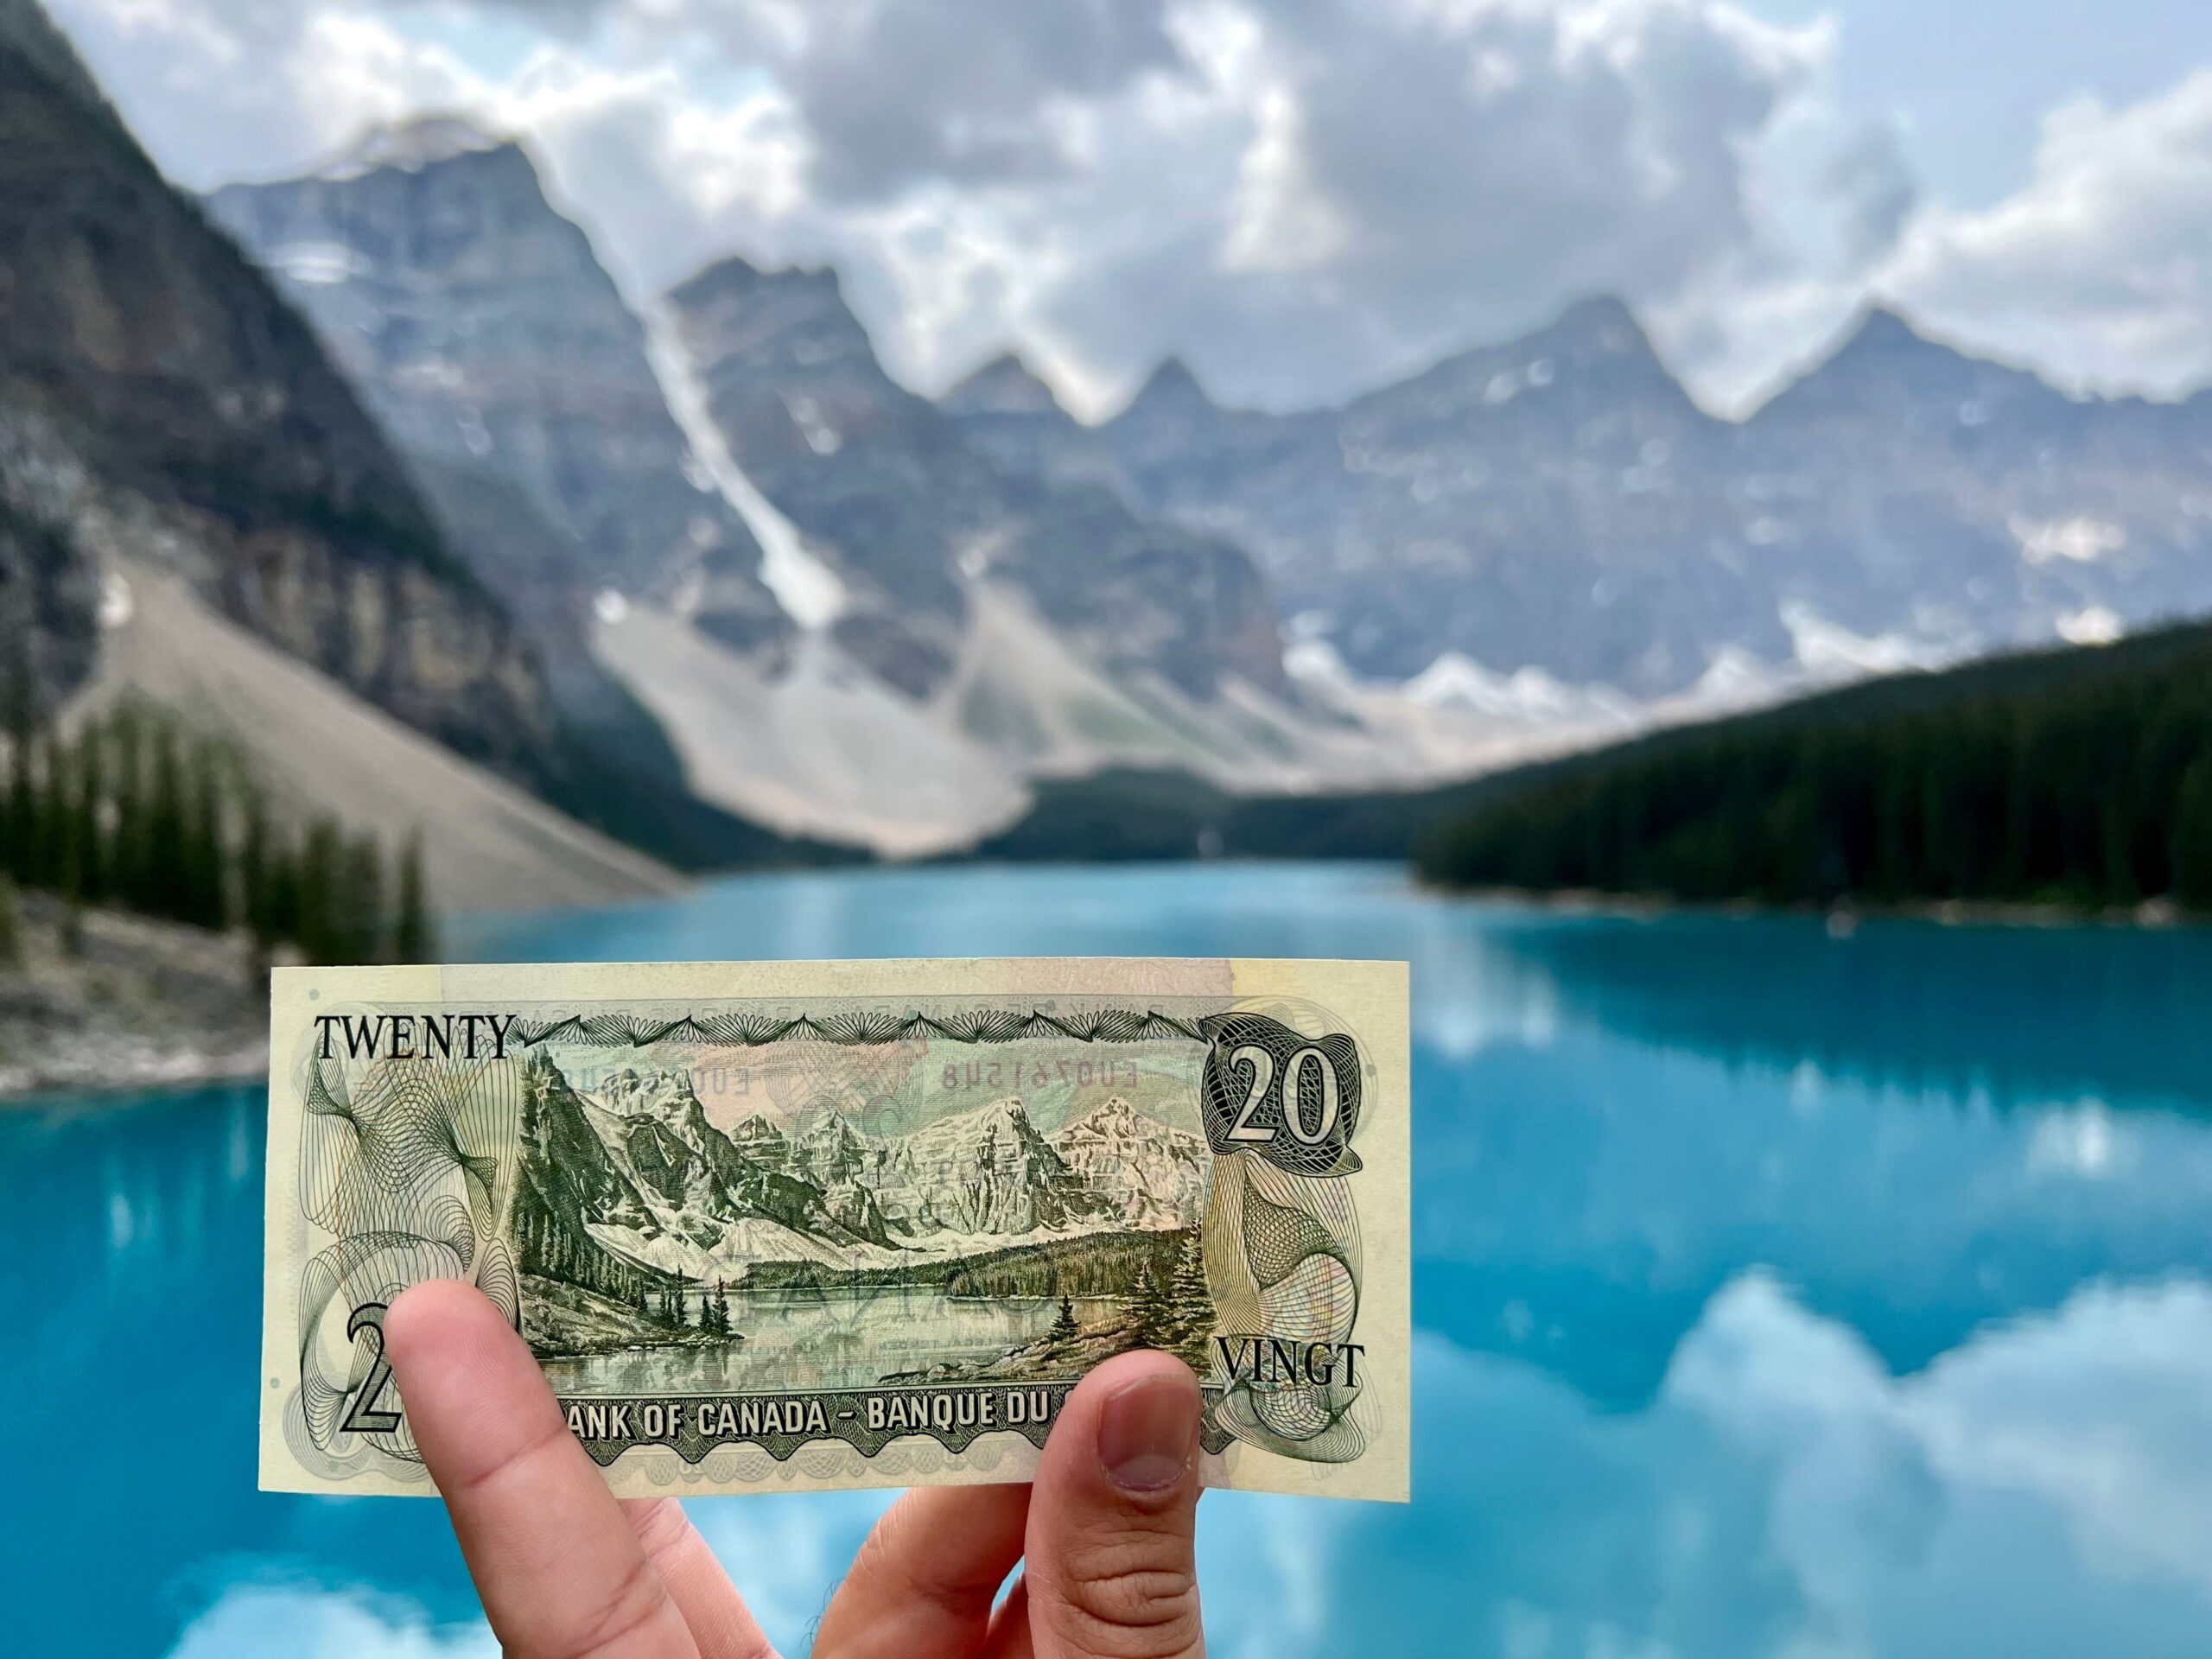 Old 20 Dollar Note & Moraine Lake – The Currency Project